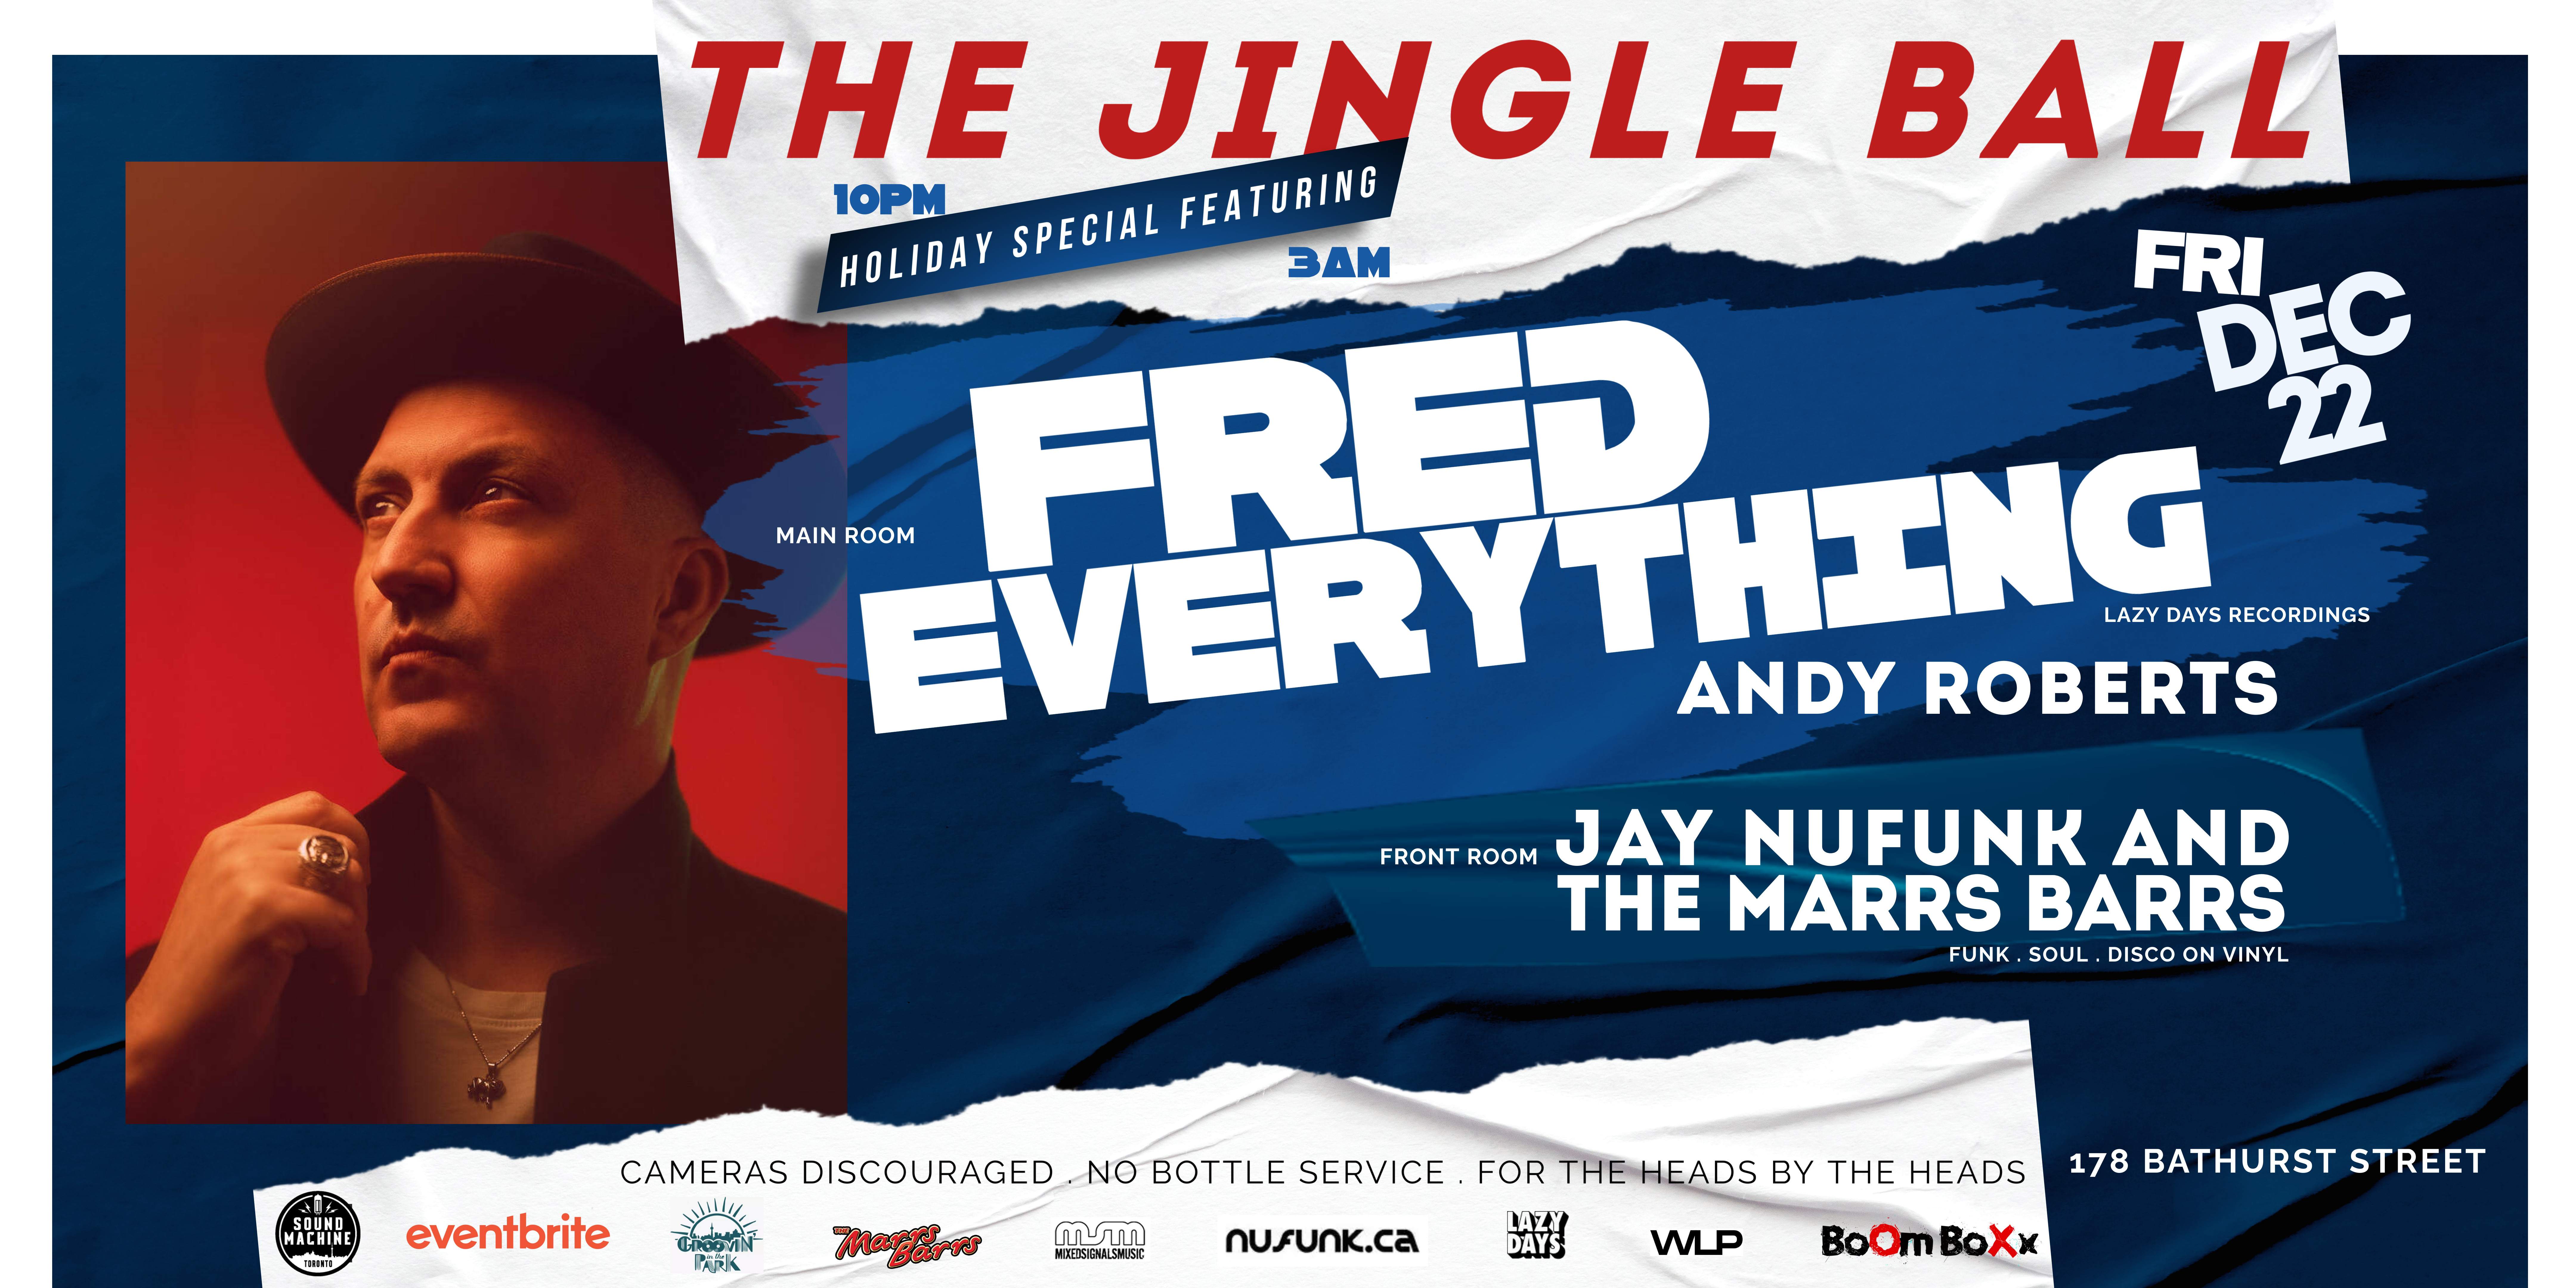 The Jingle Ball: Fred Everything - フライヤー裏